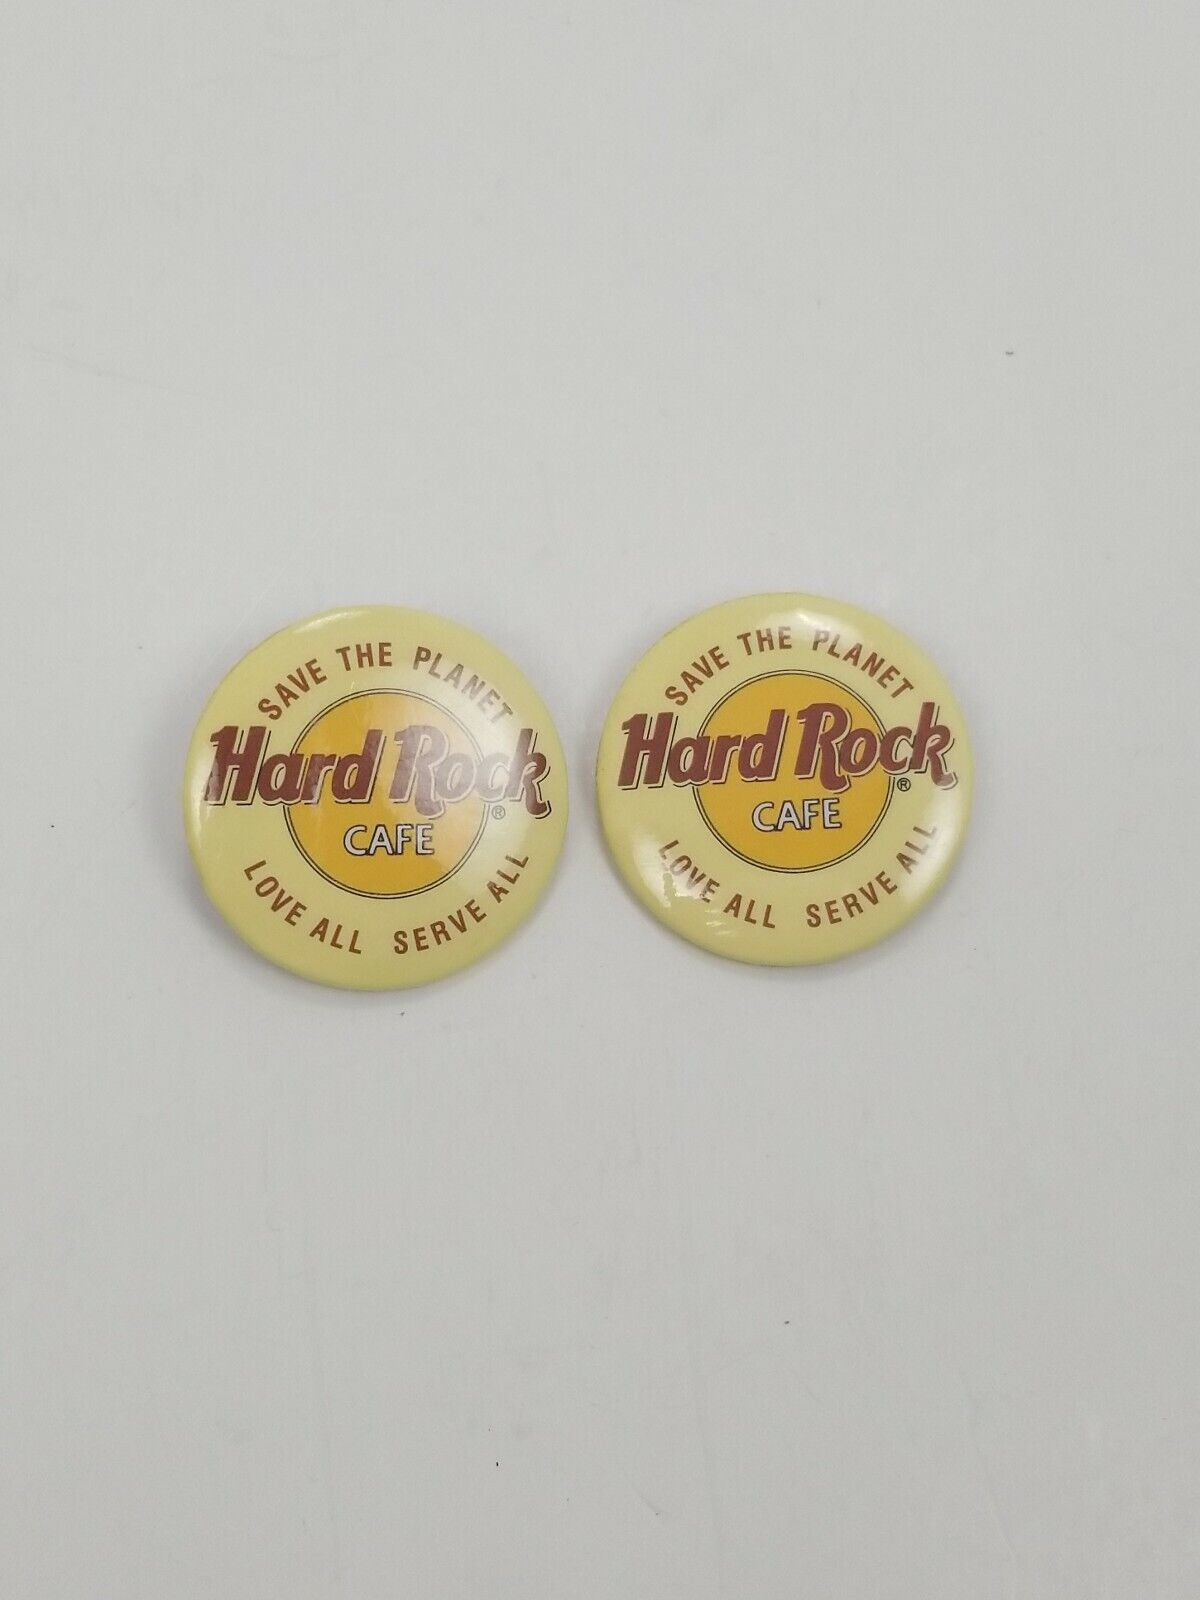 Hard Rock Cafe 80's Save The Planet Love All Serve All 1.5